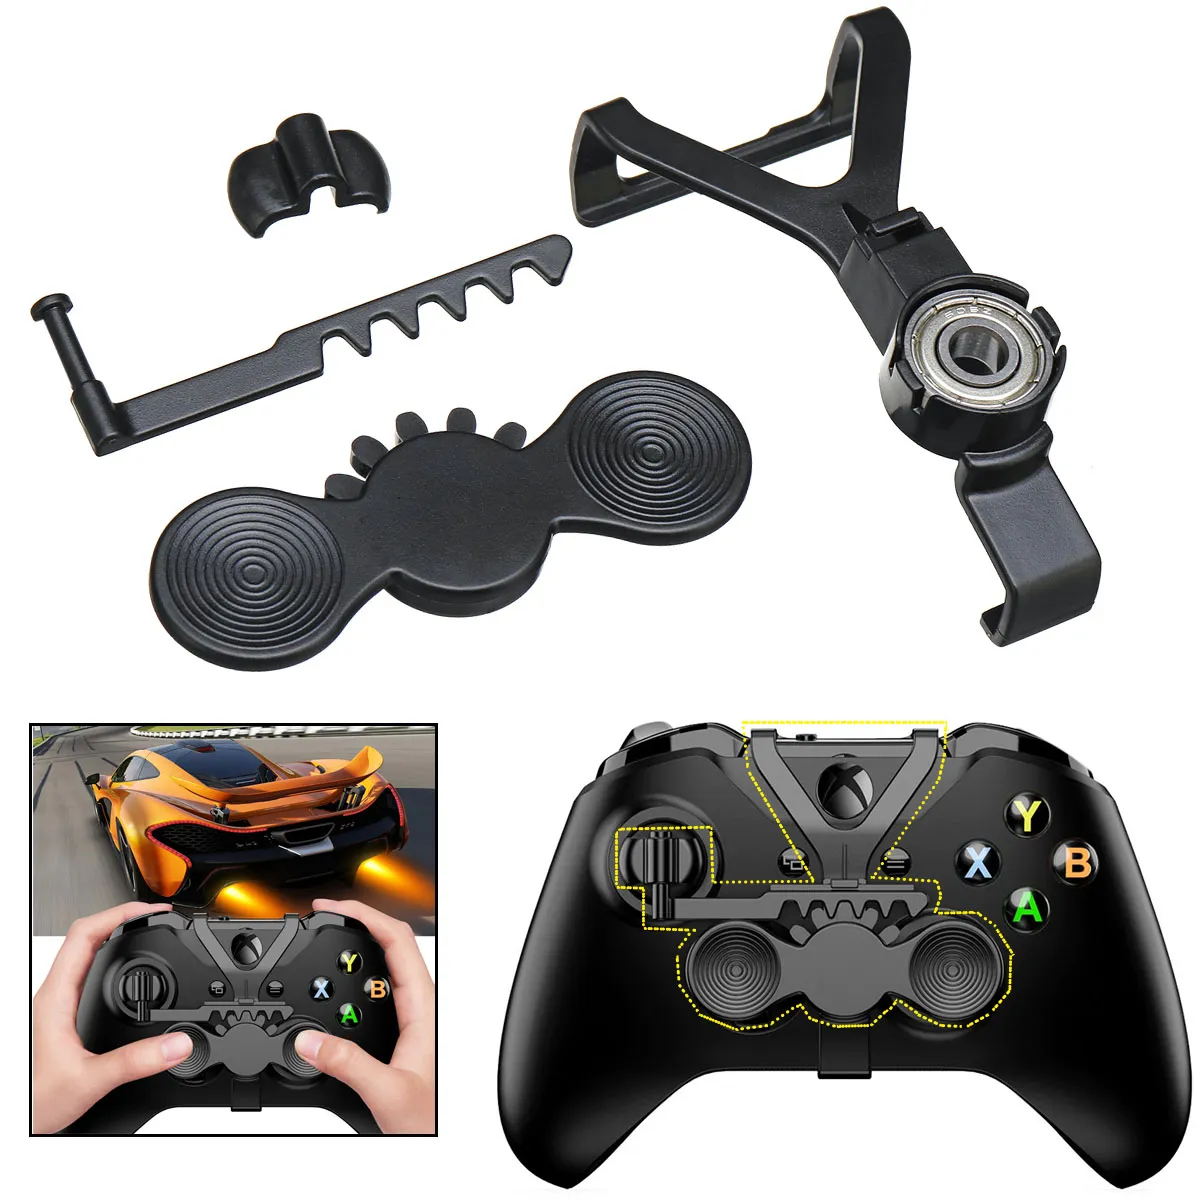 Mini Steering Wheel For Xbox One Game Controller Add-on